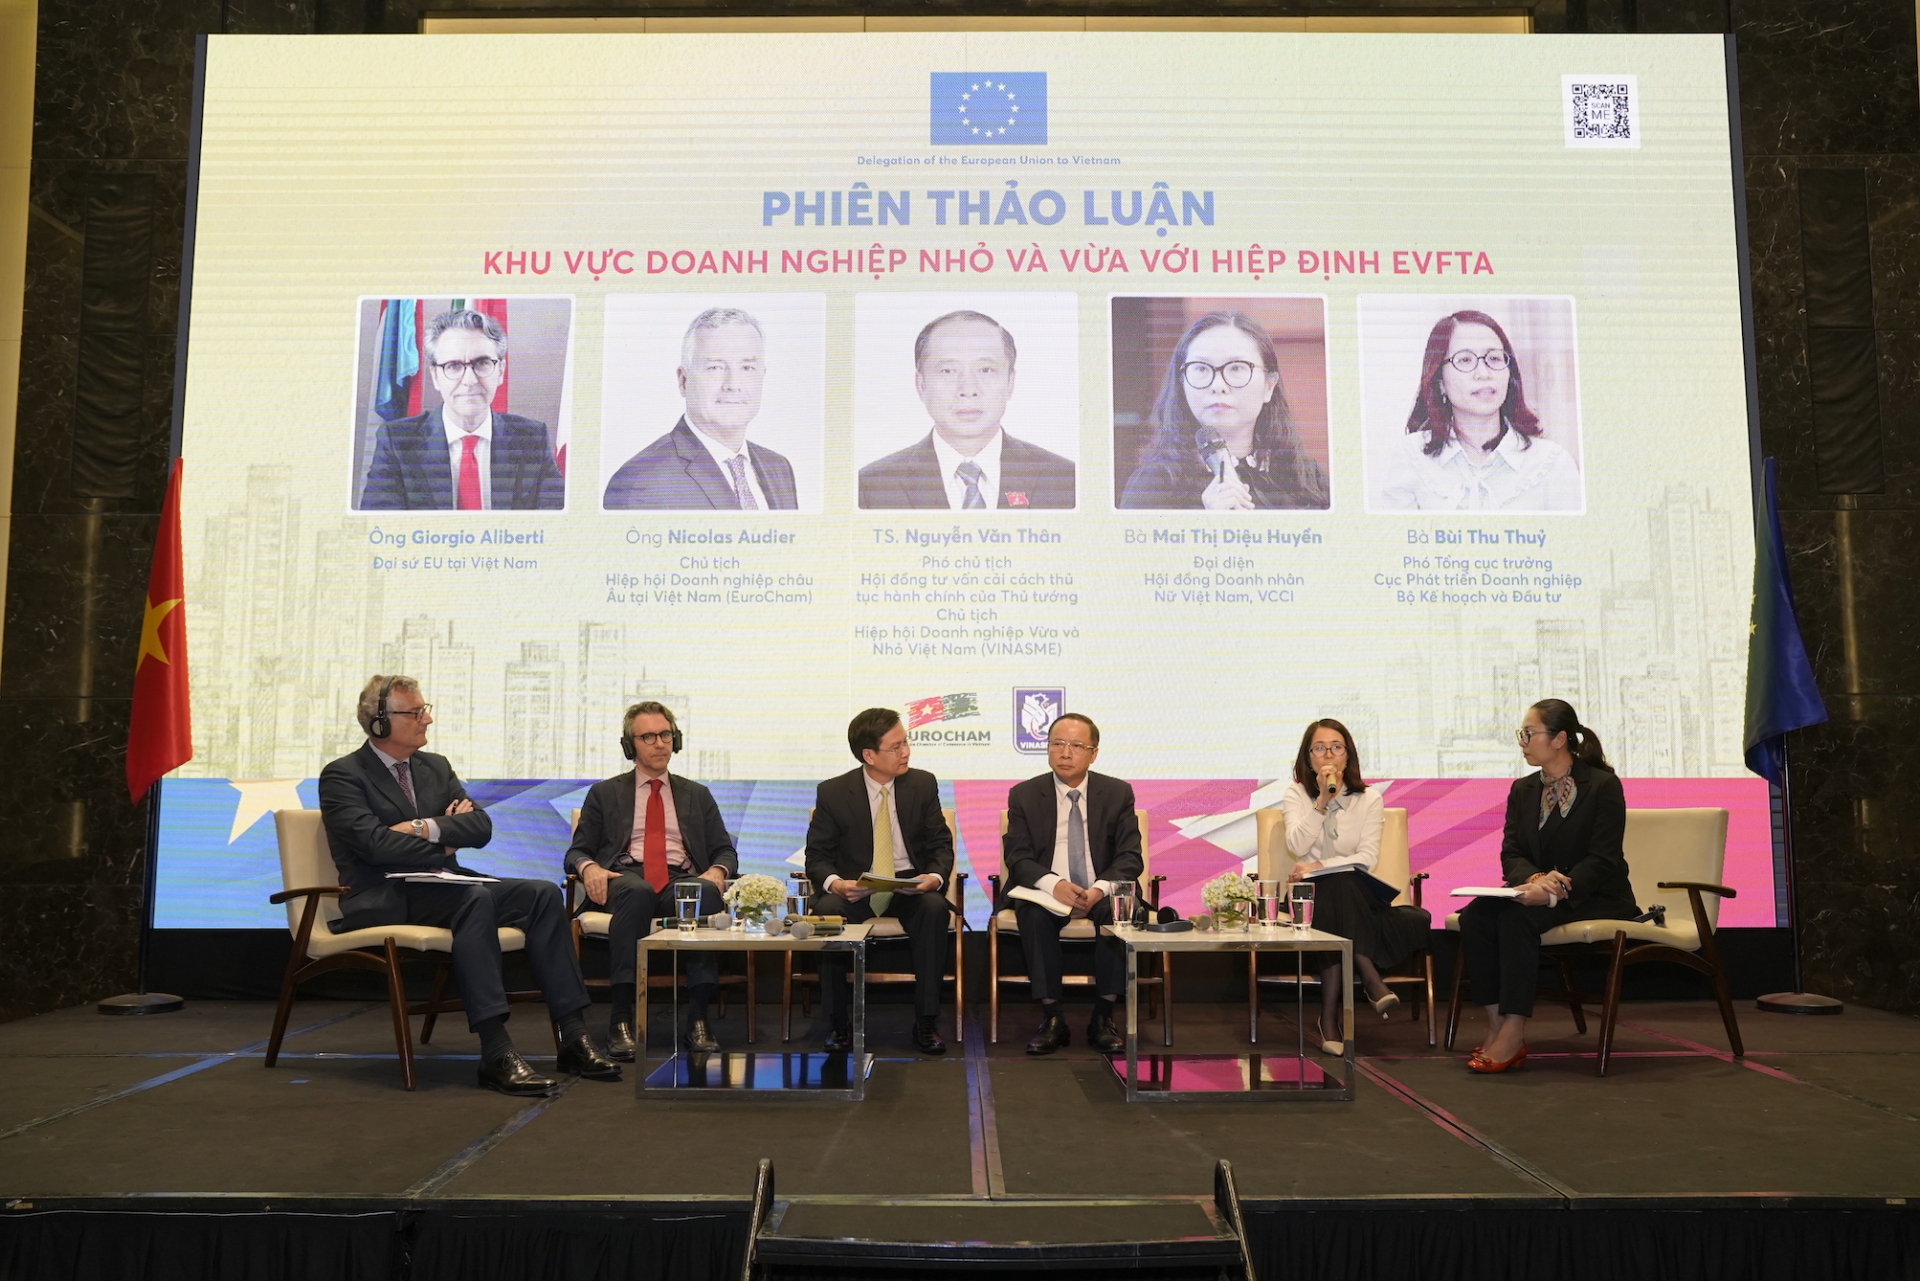 Opportunities and challenges for Vietnamese SMEs under EVFTA